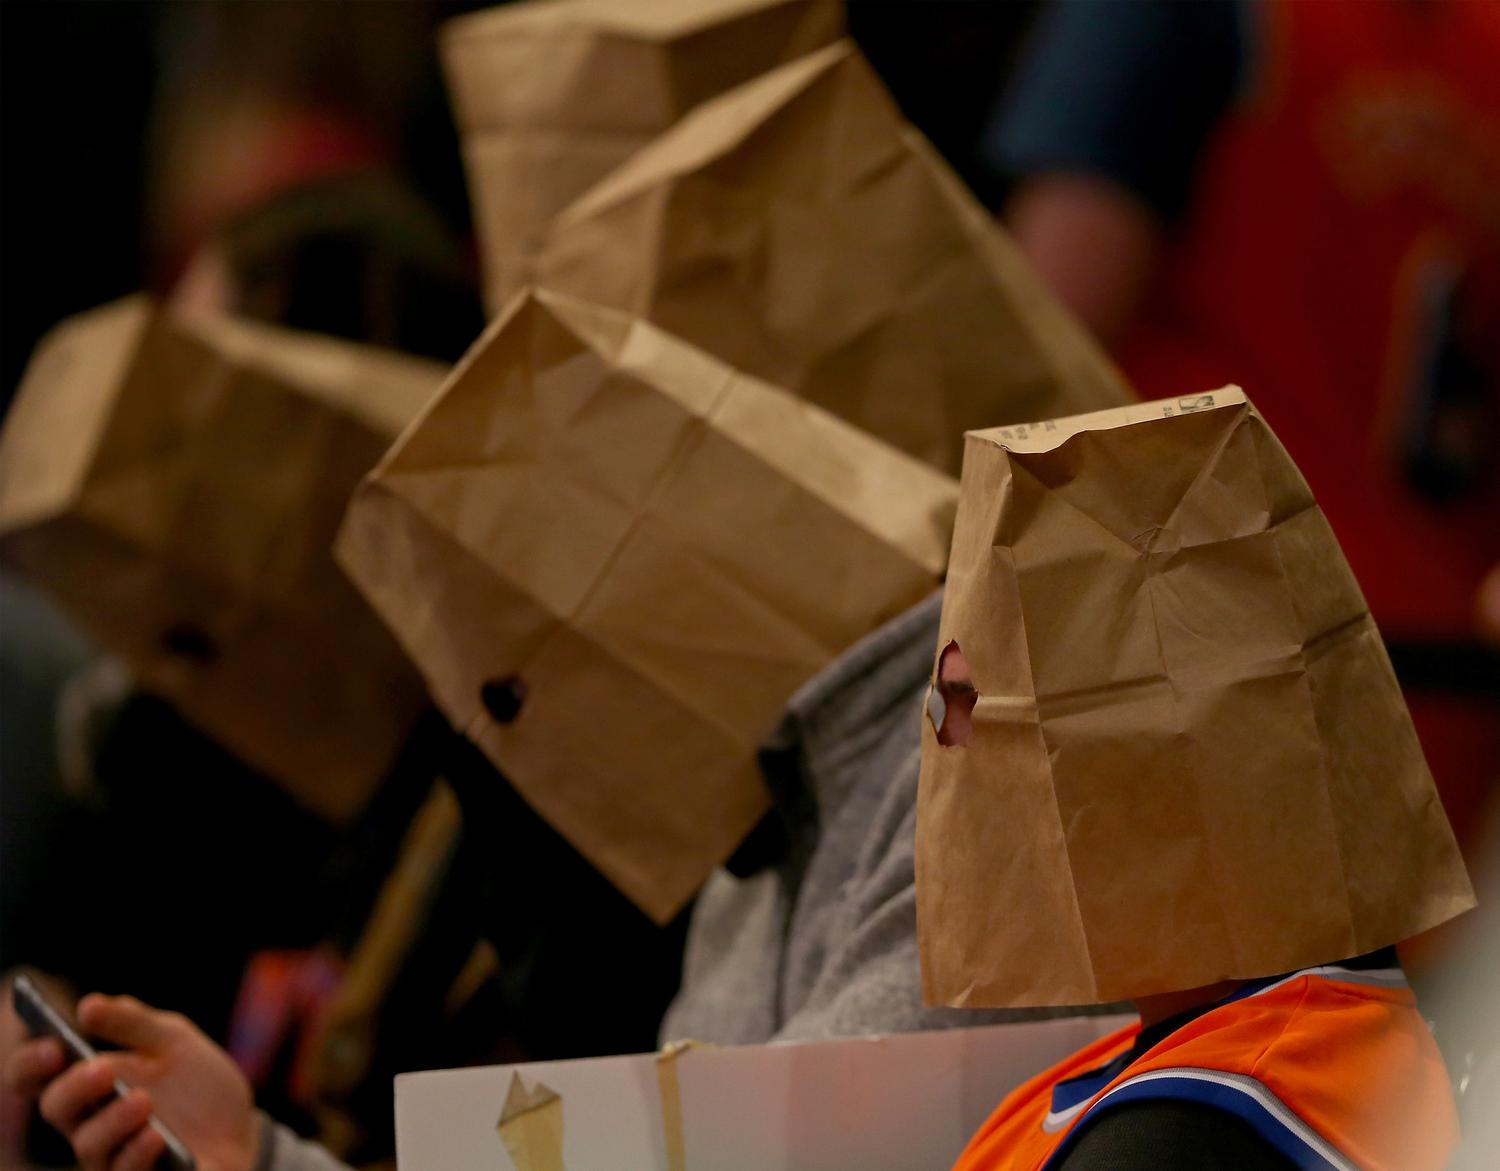 Five fans wear paper bags on their heads in the 4th quarter when the New  York Knicks play the Houston Rockets at Madison Square Garden in New York  City on January 8